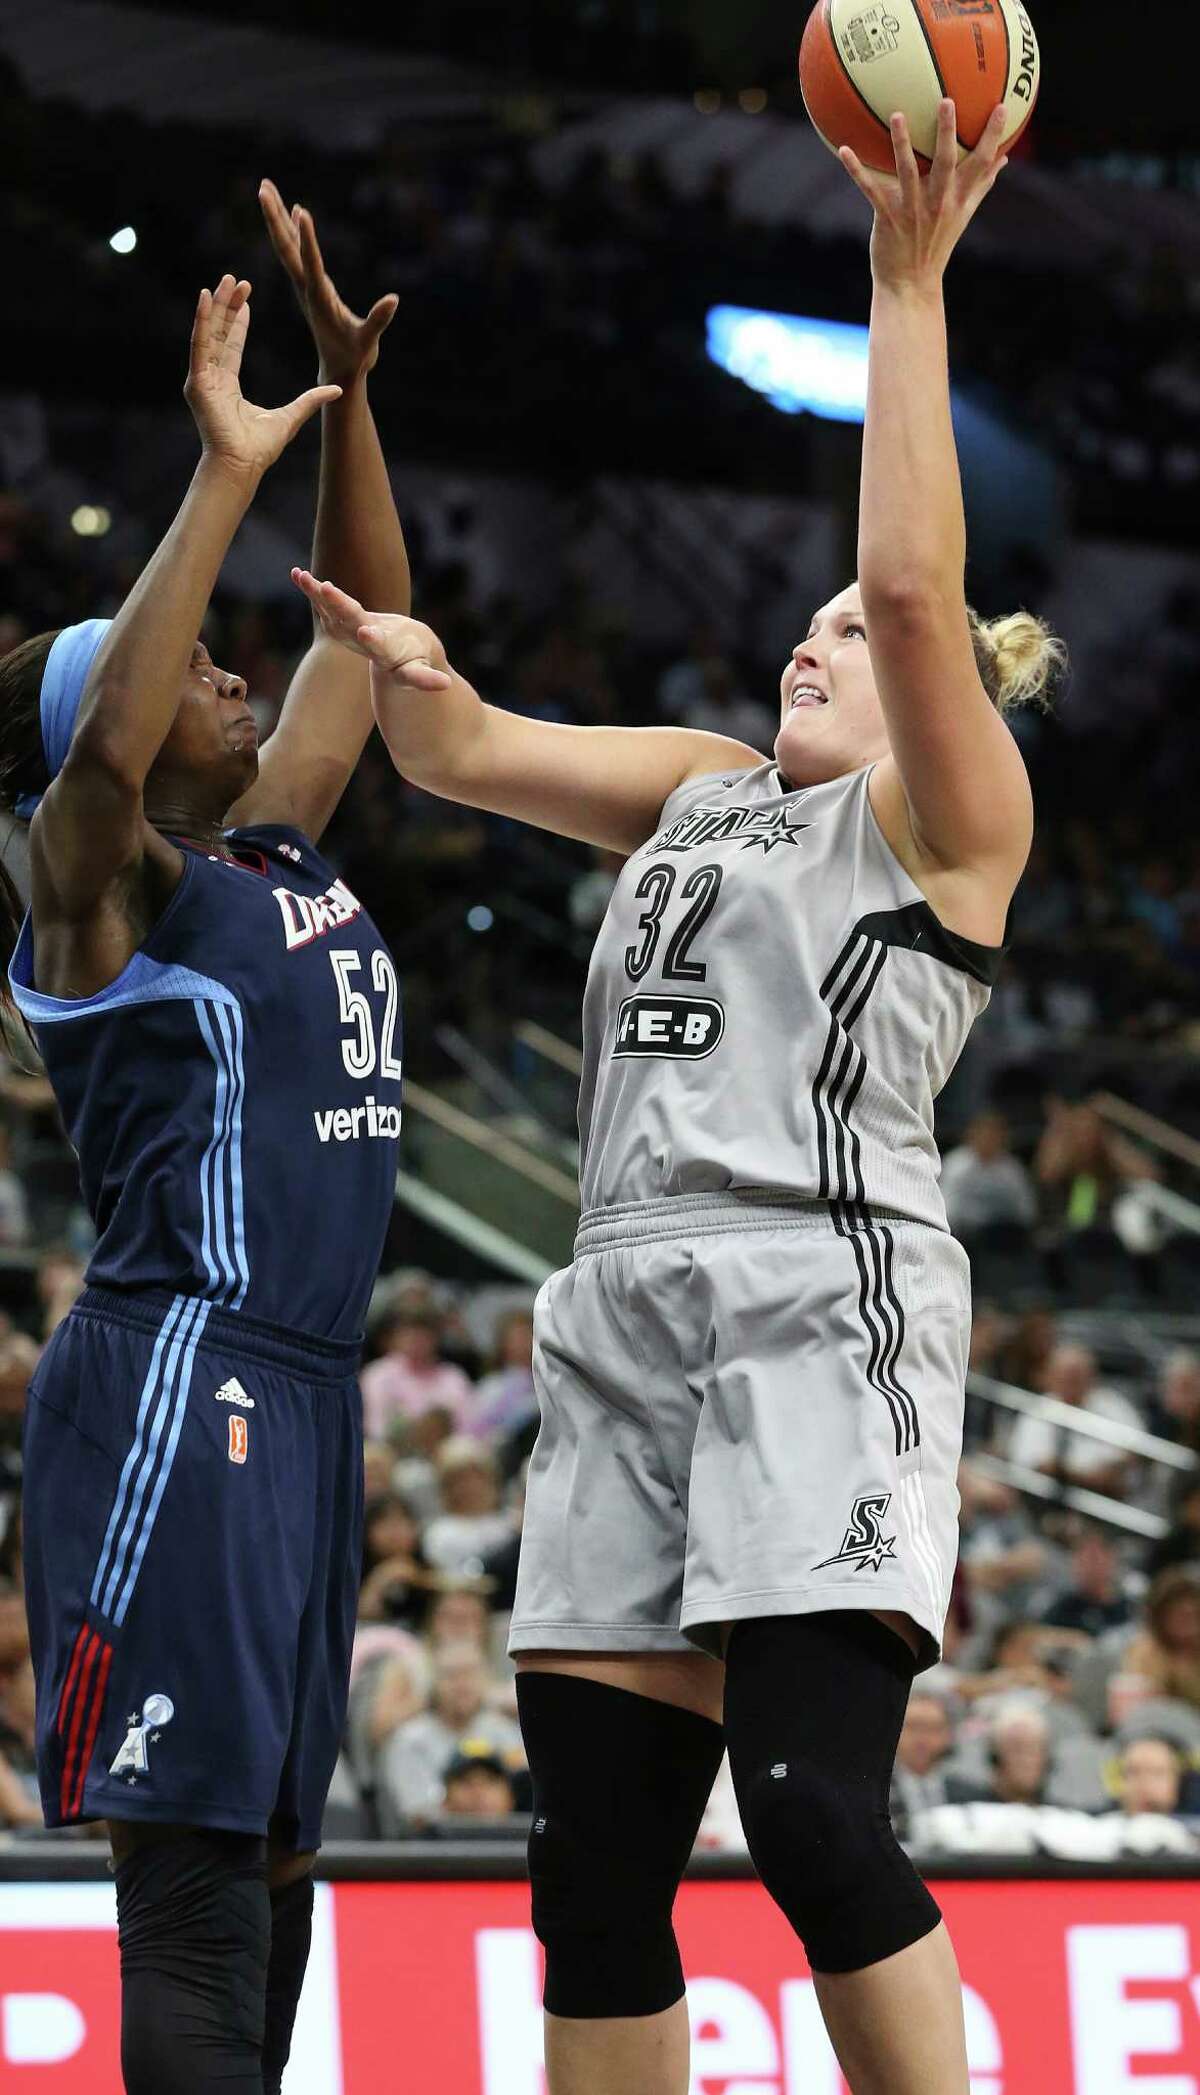 Jayne Appel-Marinelli puts up a shot against Elizabeth Williams in the first half as the Stars host Atlanta at the AT&T Center on June 25, 2016.